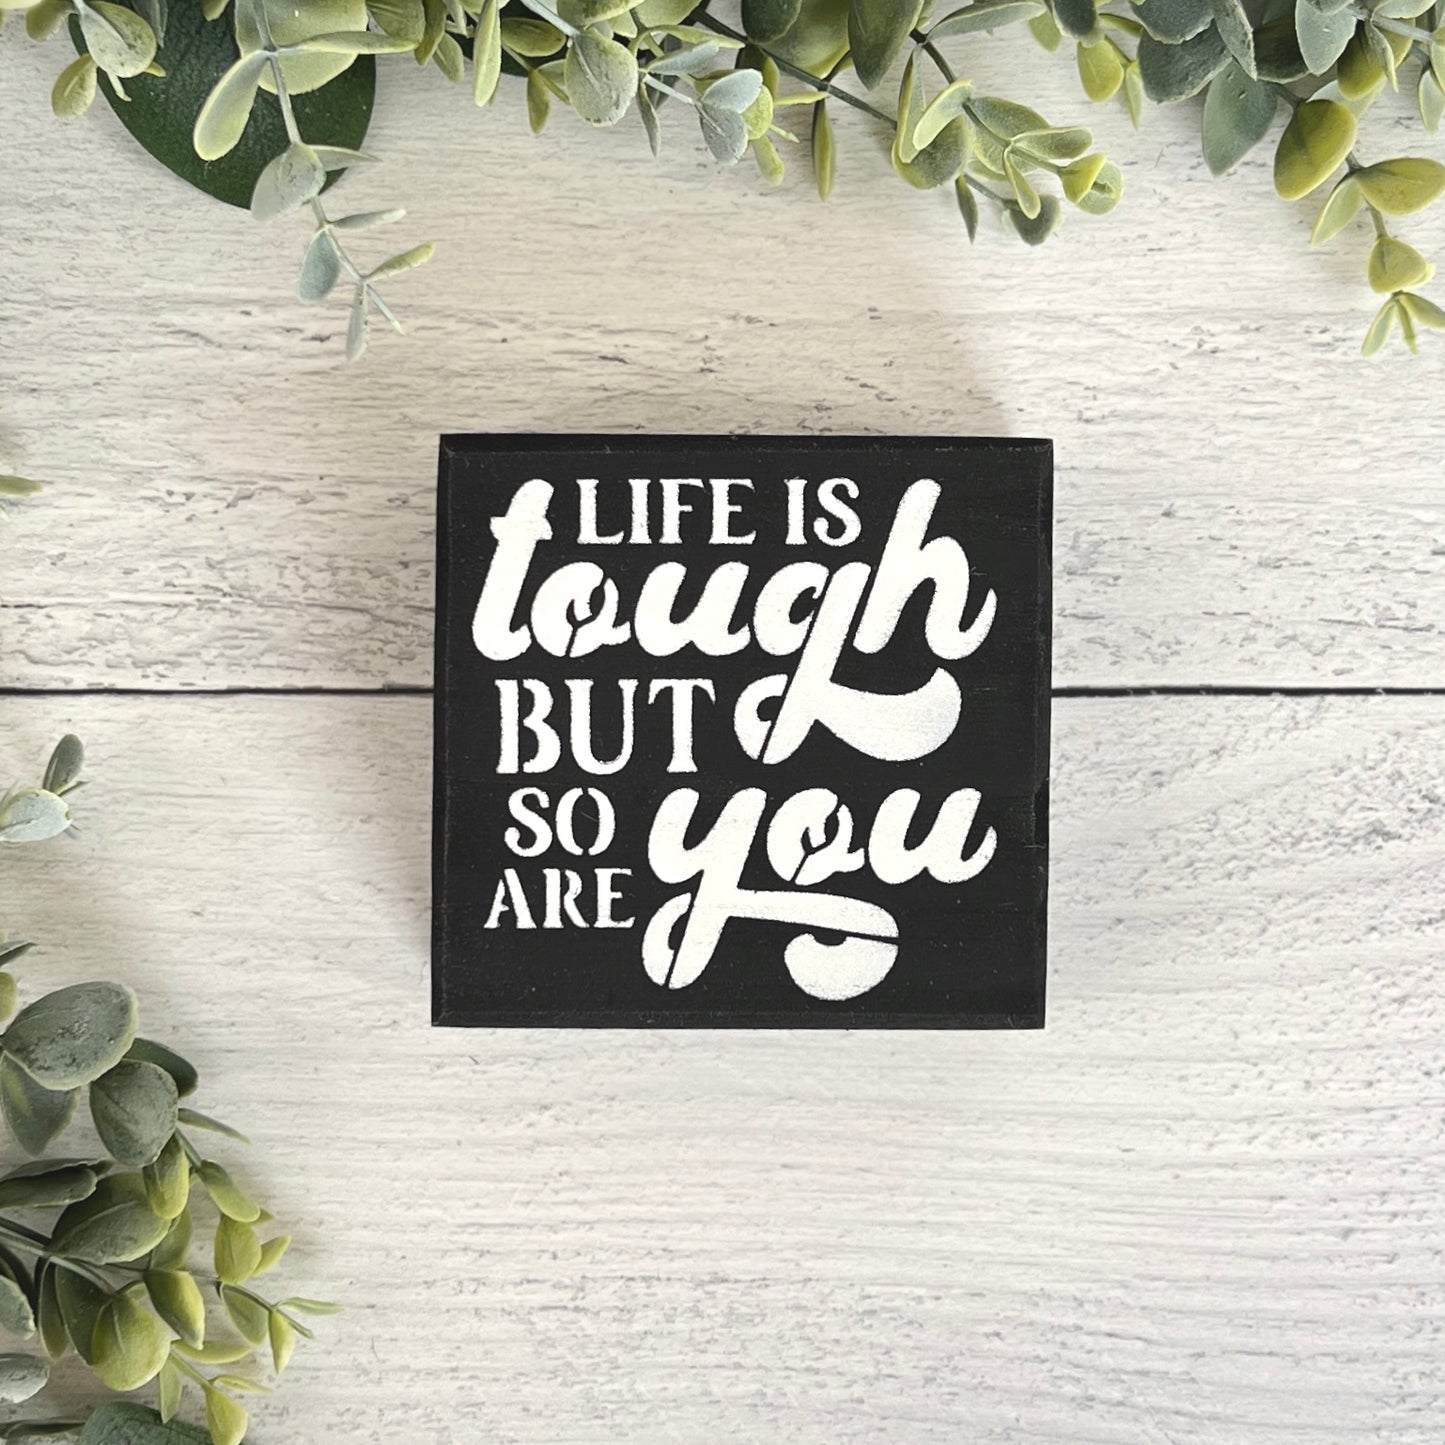 Life is Tough but so are you small wood inspirational sign